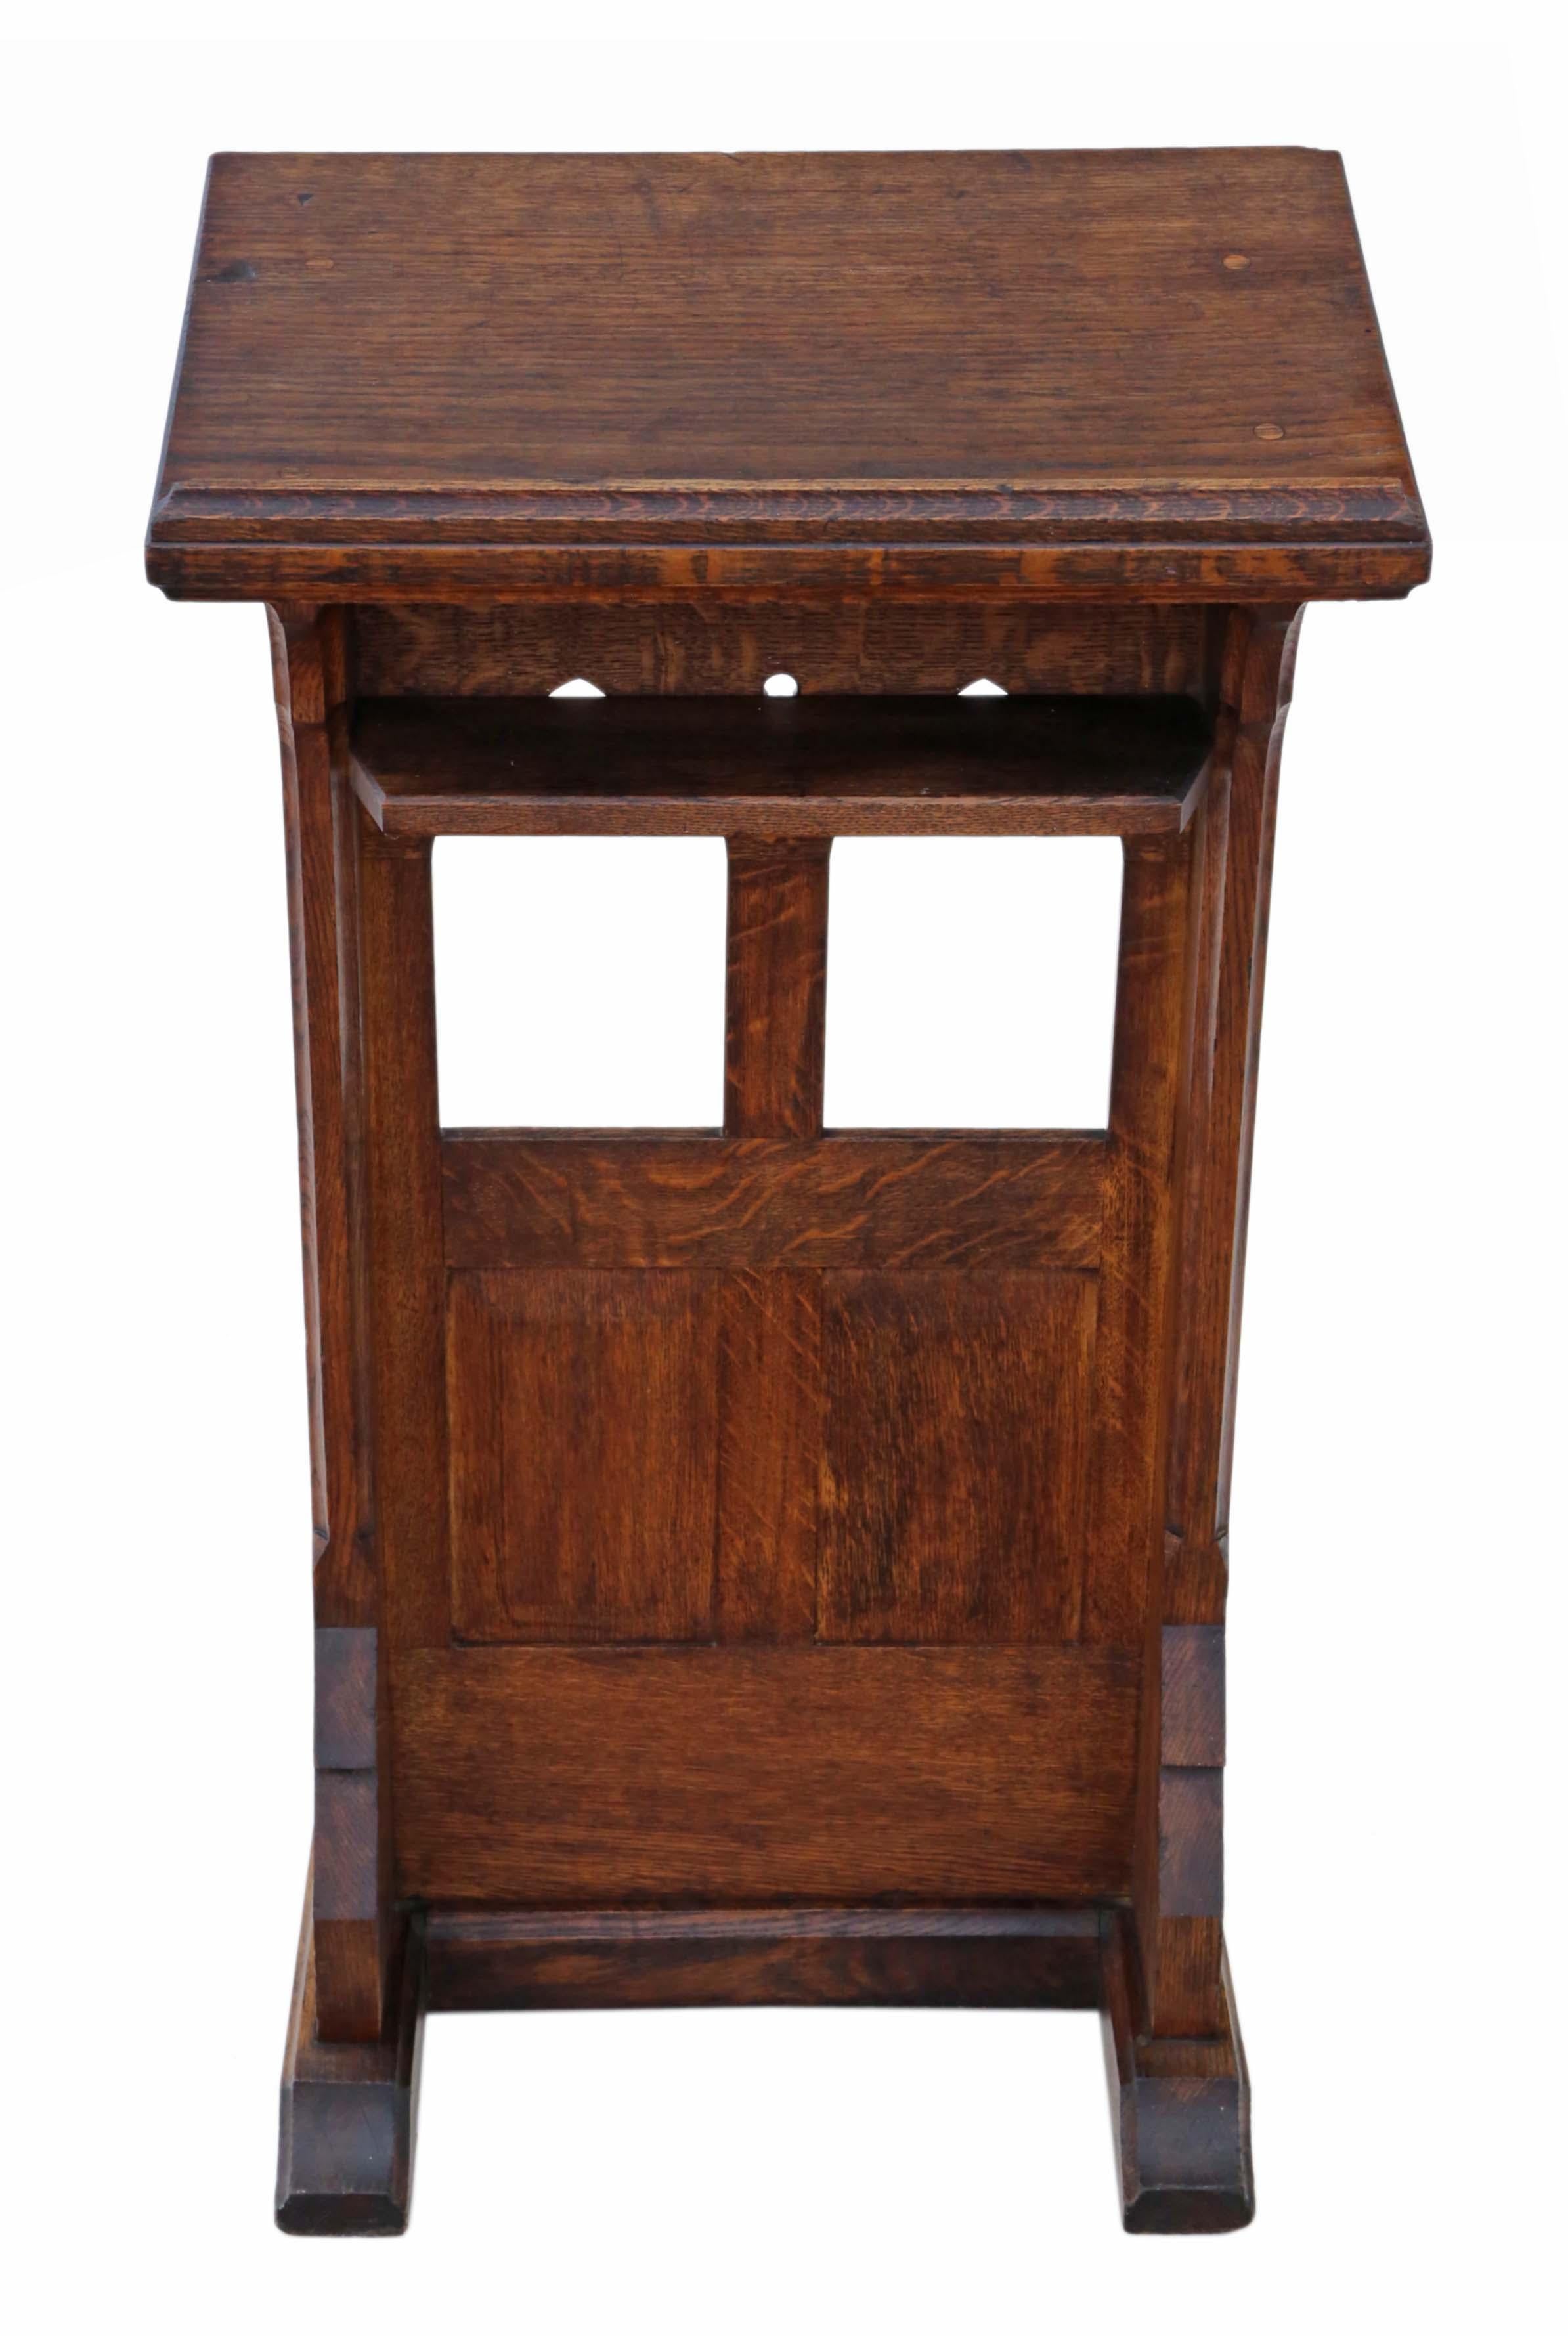 Antique quality 19th century Gothic carved oak pedestal lectern stand table station. Would make an impressive restaurant reception station.
This item is fine quality, solid and very heavy, with no loose joints. Very stable.
An attractive piece